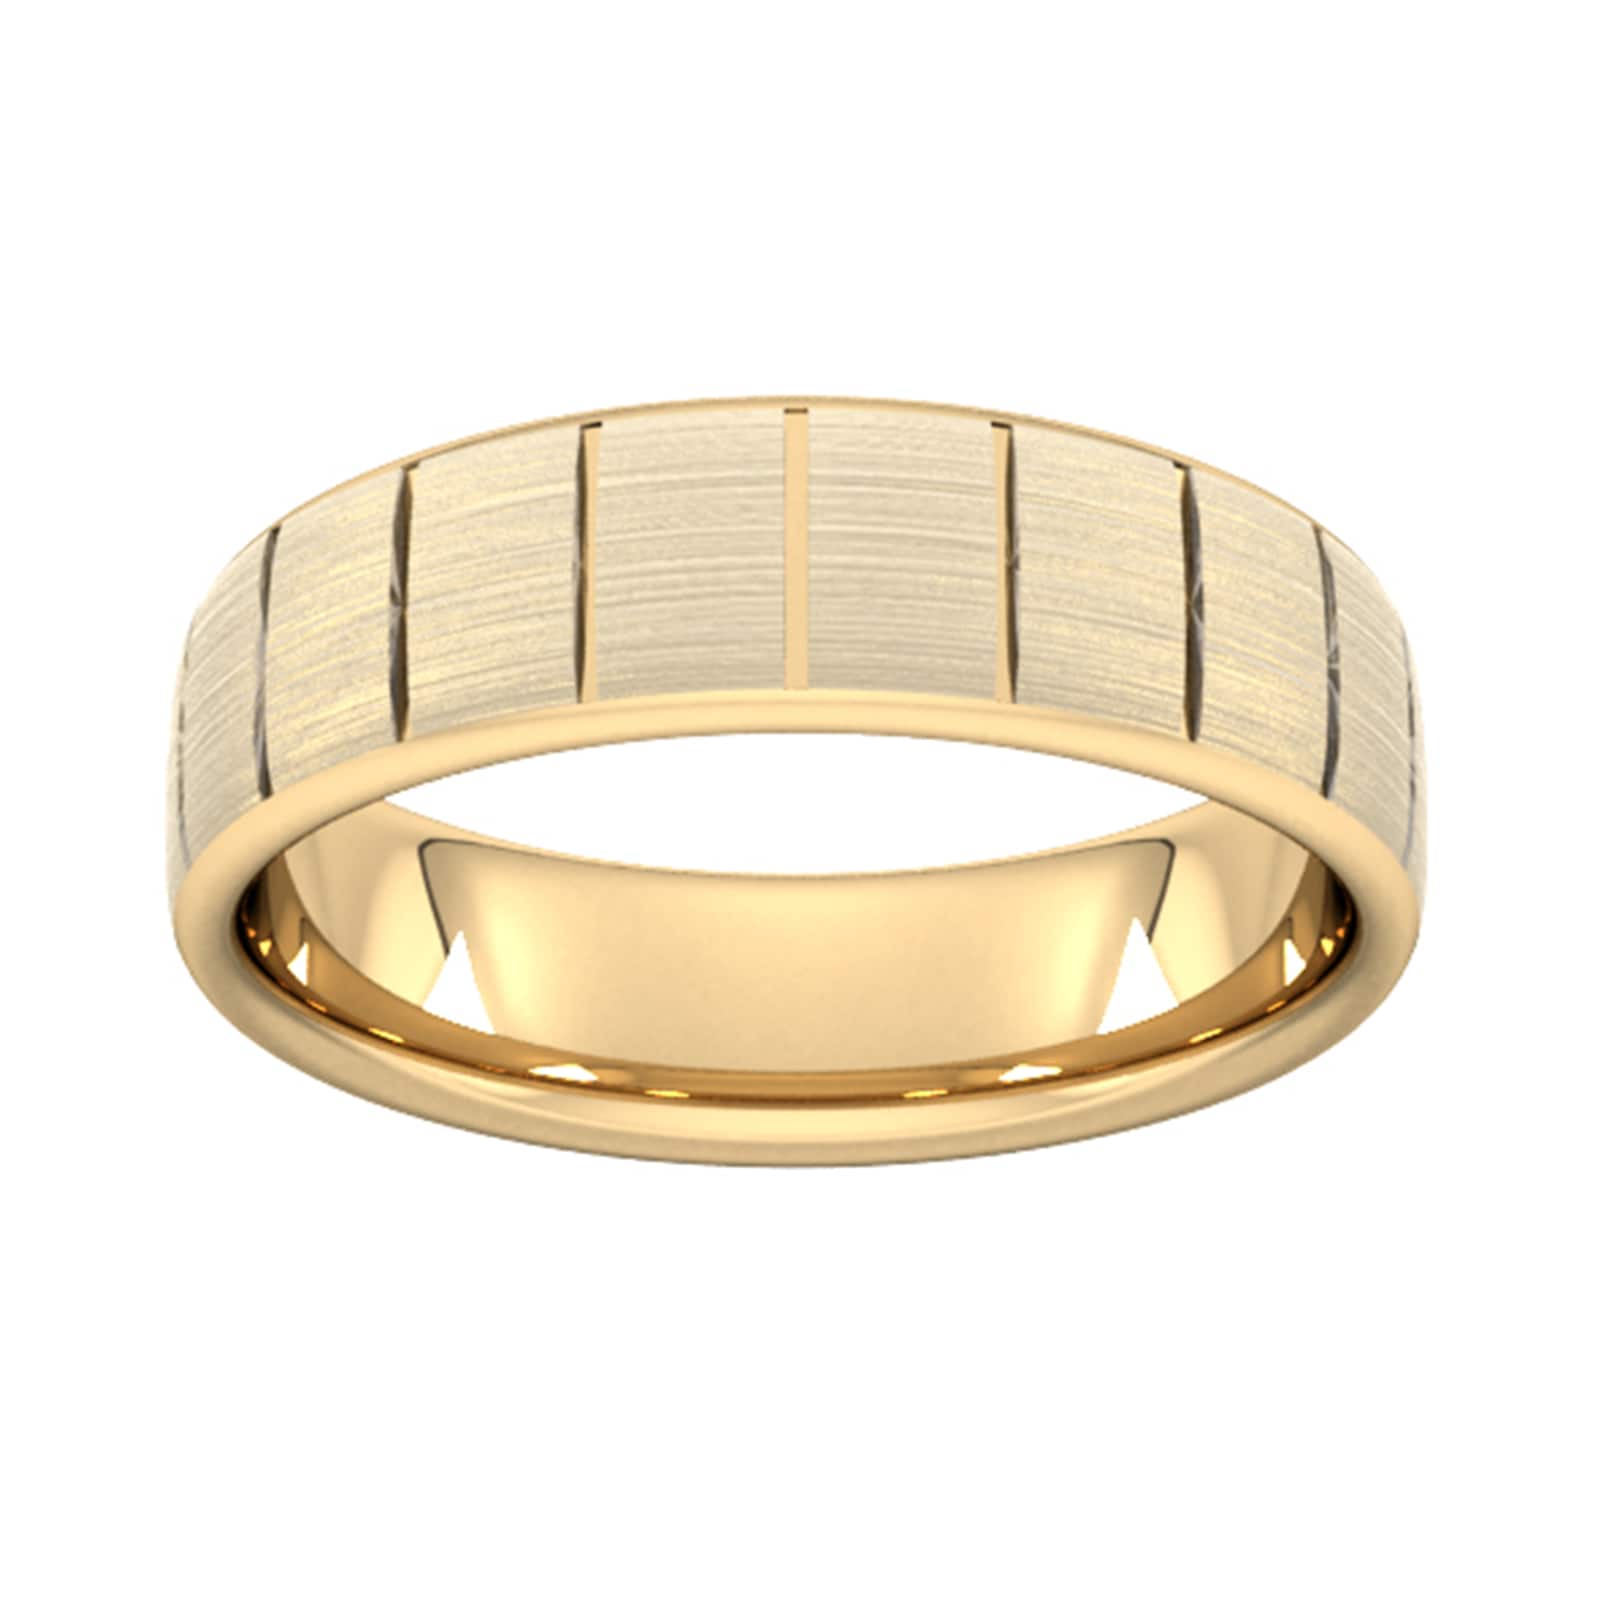 6mm Slight Court Heavy Vertical Lines Wedding Ring In 18 Carat Yellow Gold - Ring Size P